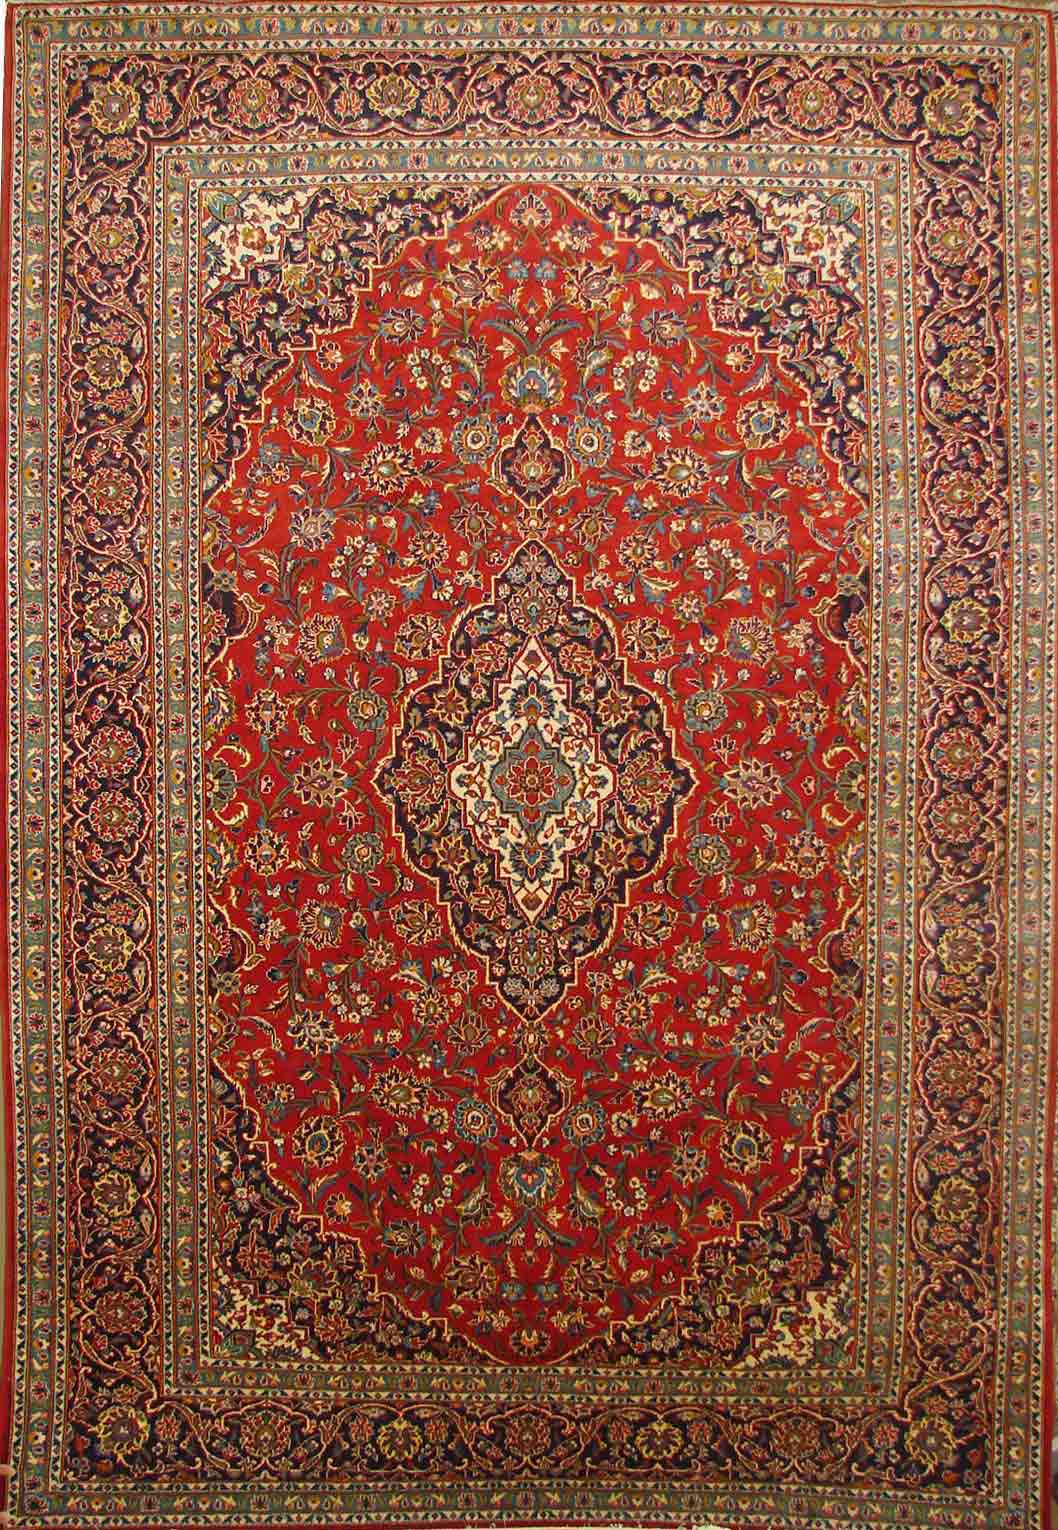 Antique Style Rugs KASHAN 2020 Rust - Orange & Black - Charcoal Hand Knotted Rug